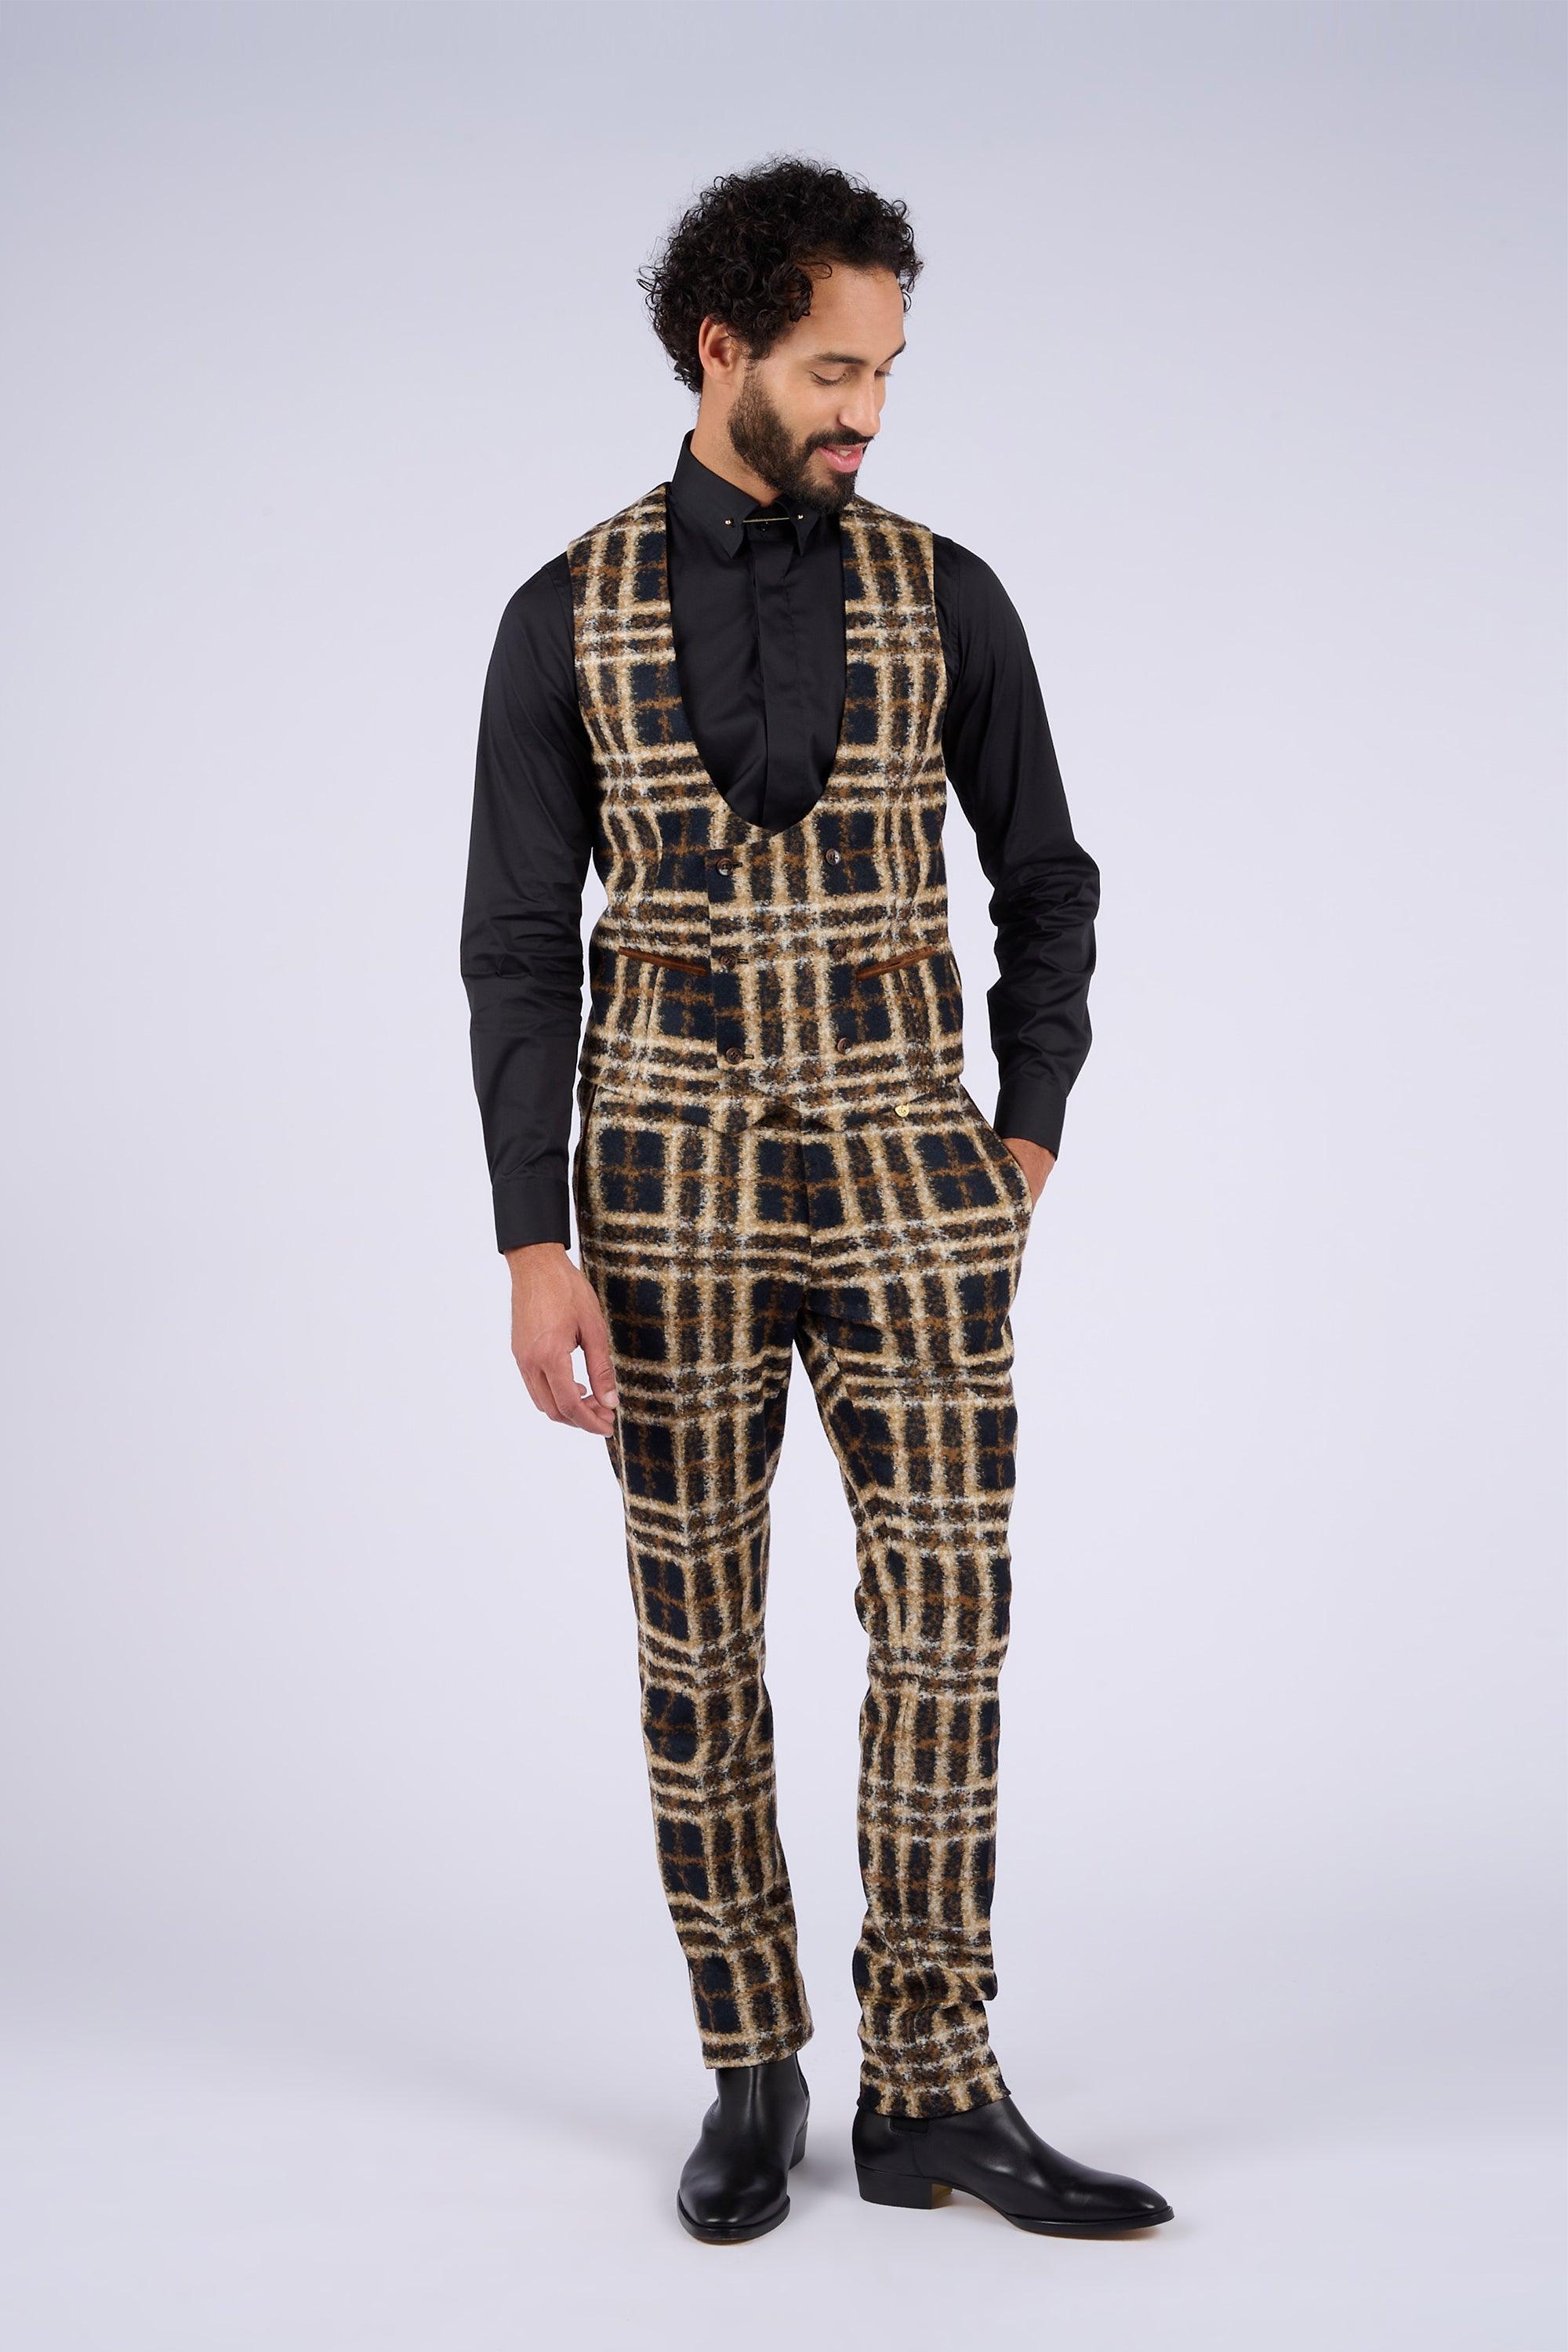 Gilet Arcole - Lords & Fools bonaparte, dandy, elegance, empire, frenchstyle, menfashion, menstyle, New collection, suit, tailoring